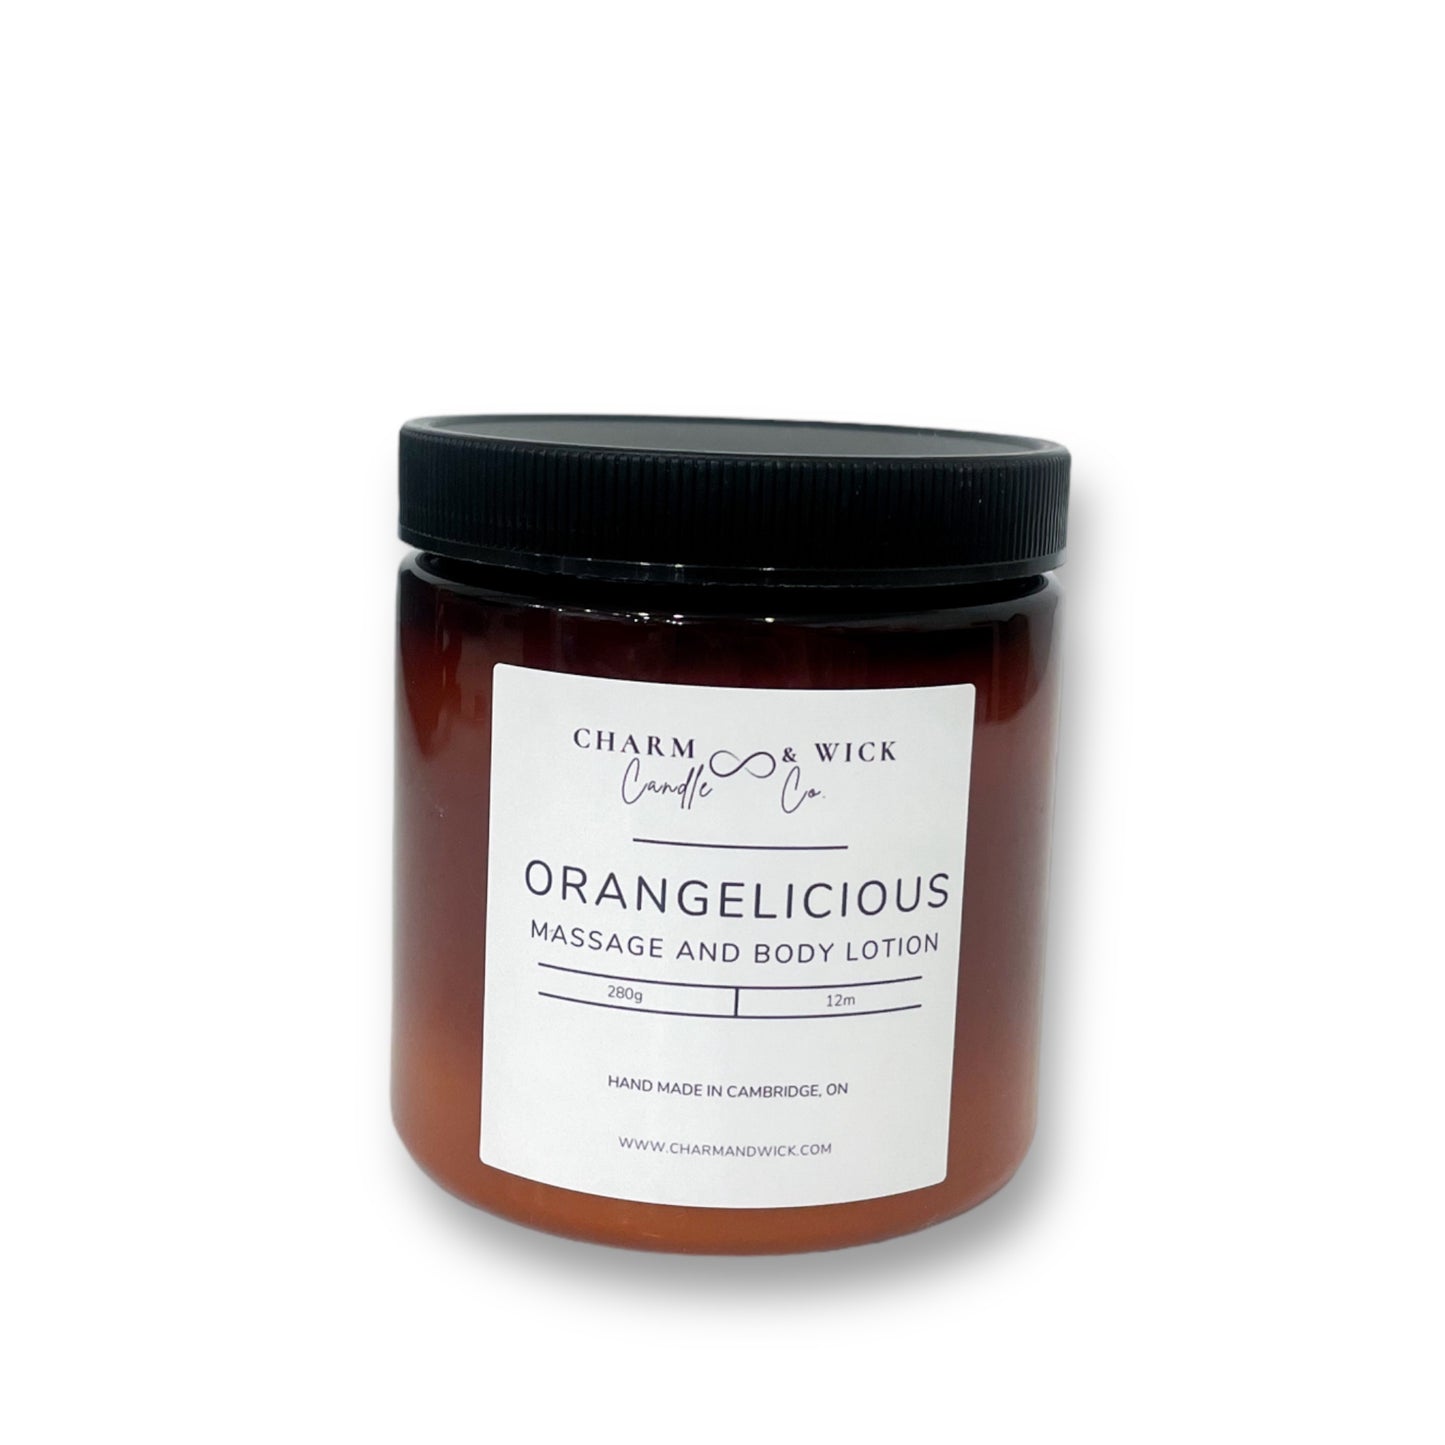 Orangelicious Massage and Body Lotion